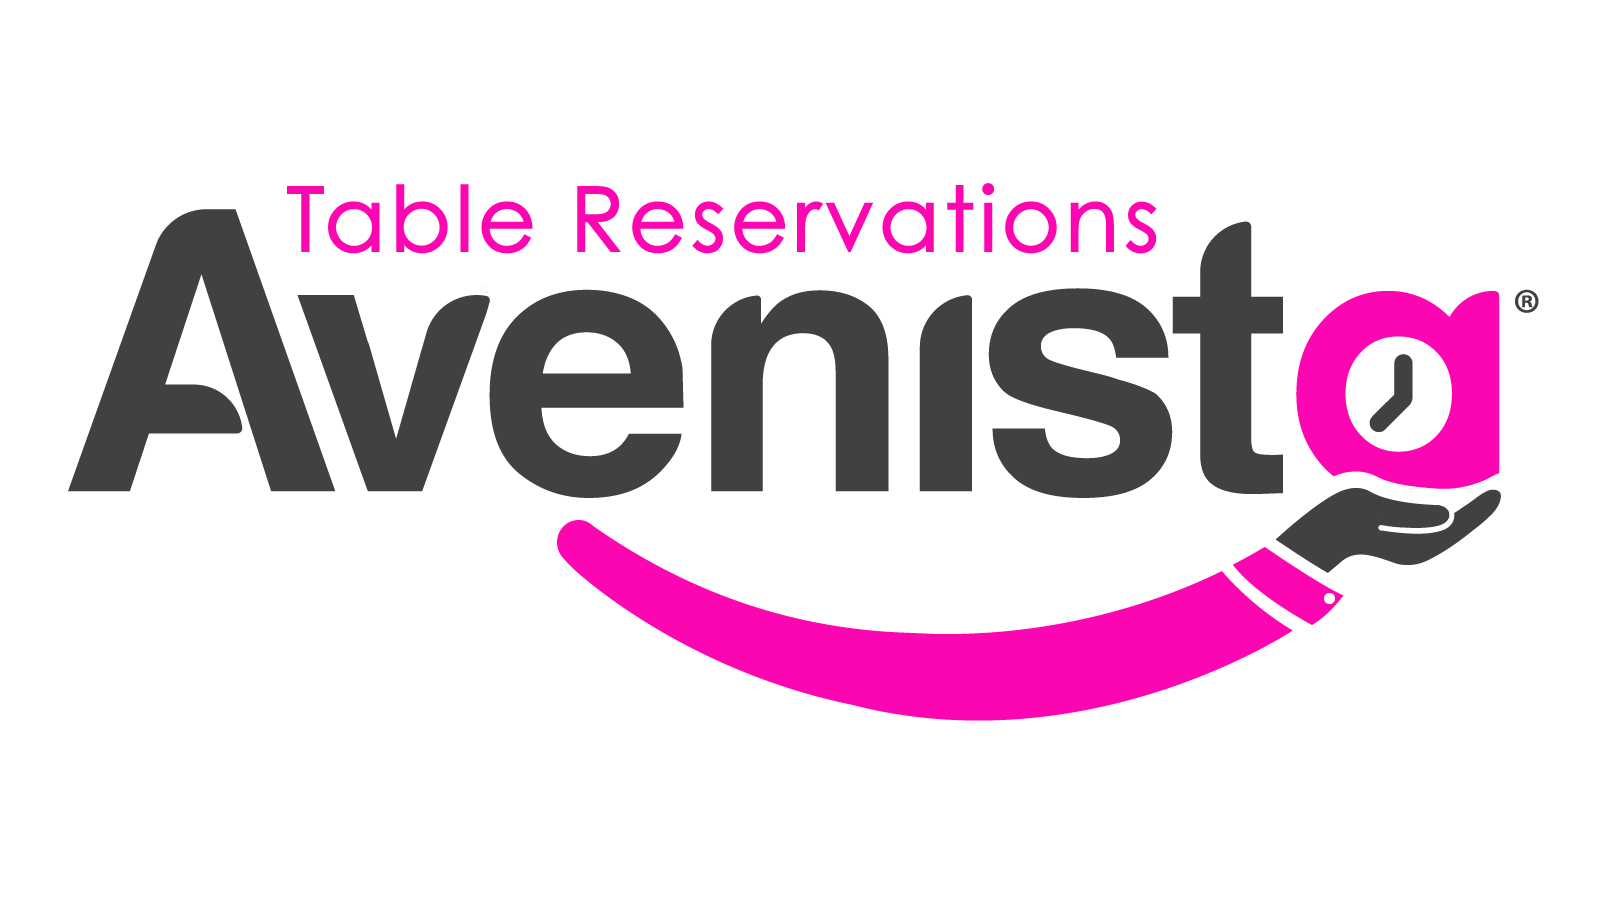 Avenista Table Reservations